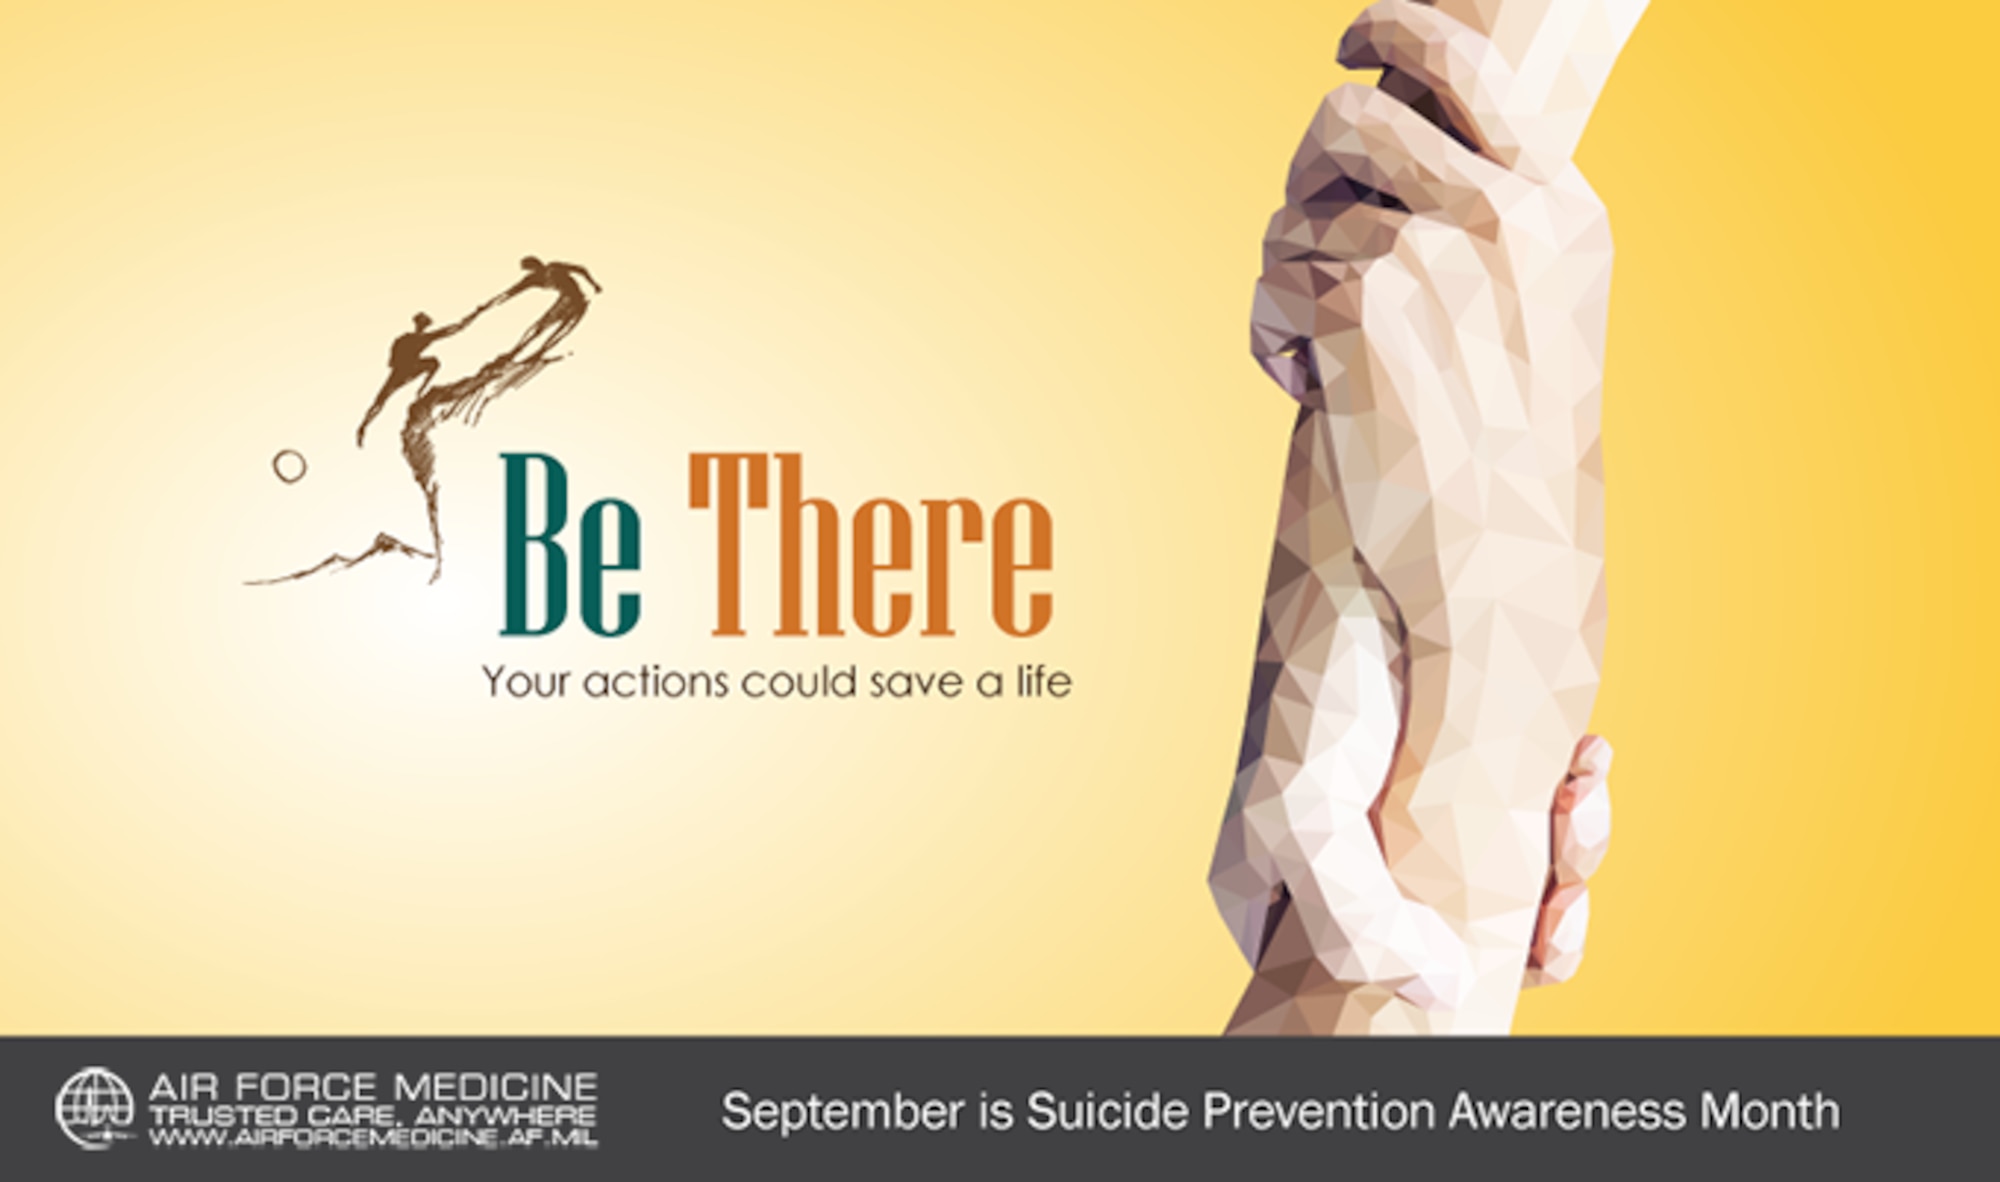 Be there, be aware: help prevent suicide